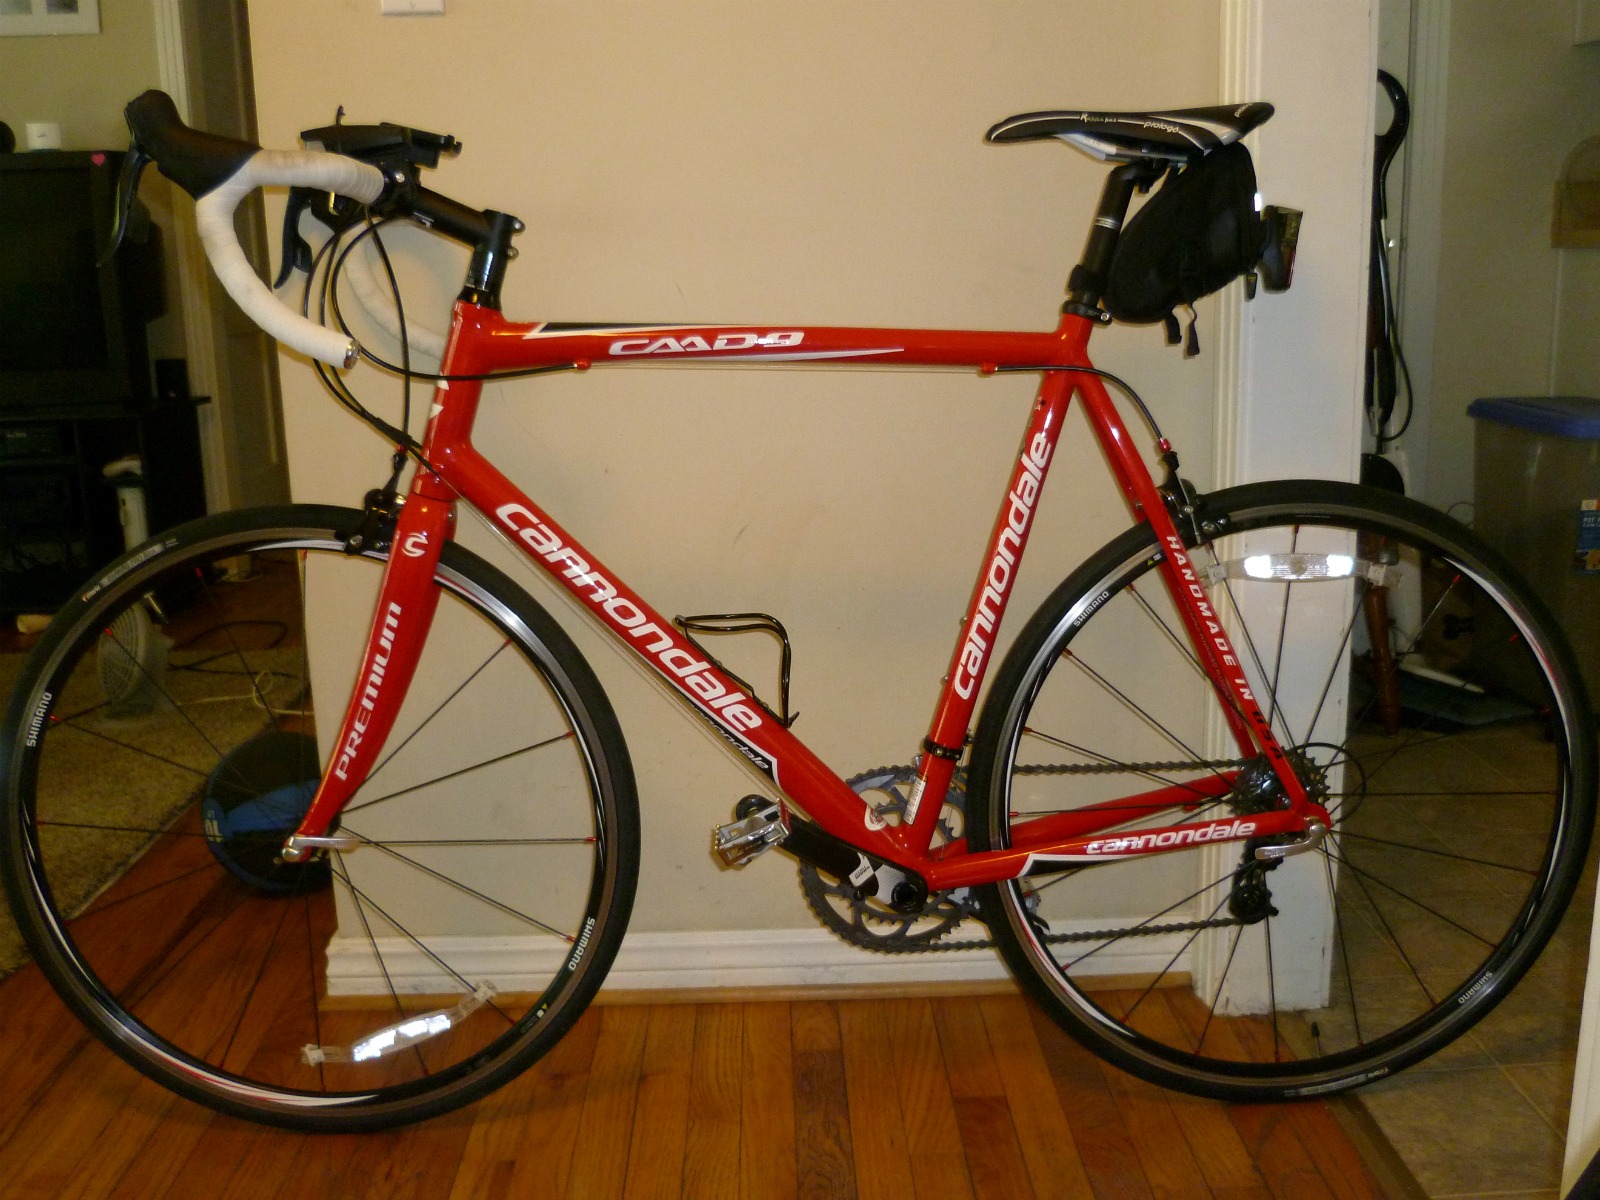 Cannondale CAAD9 4 - My First Road Bike